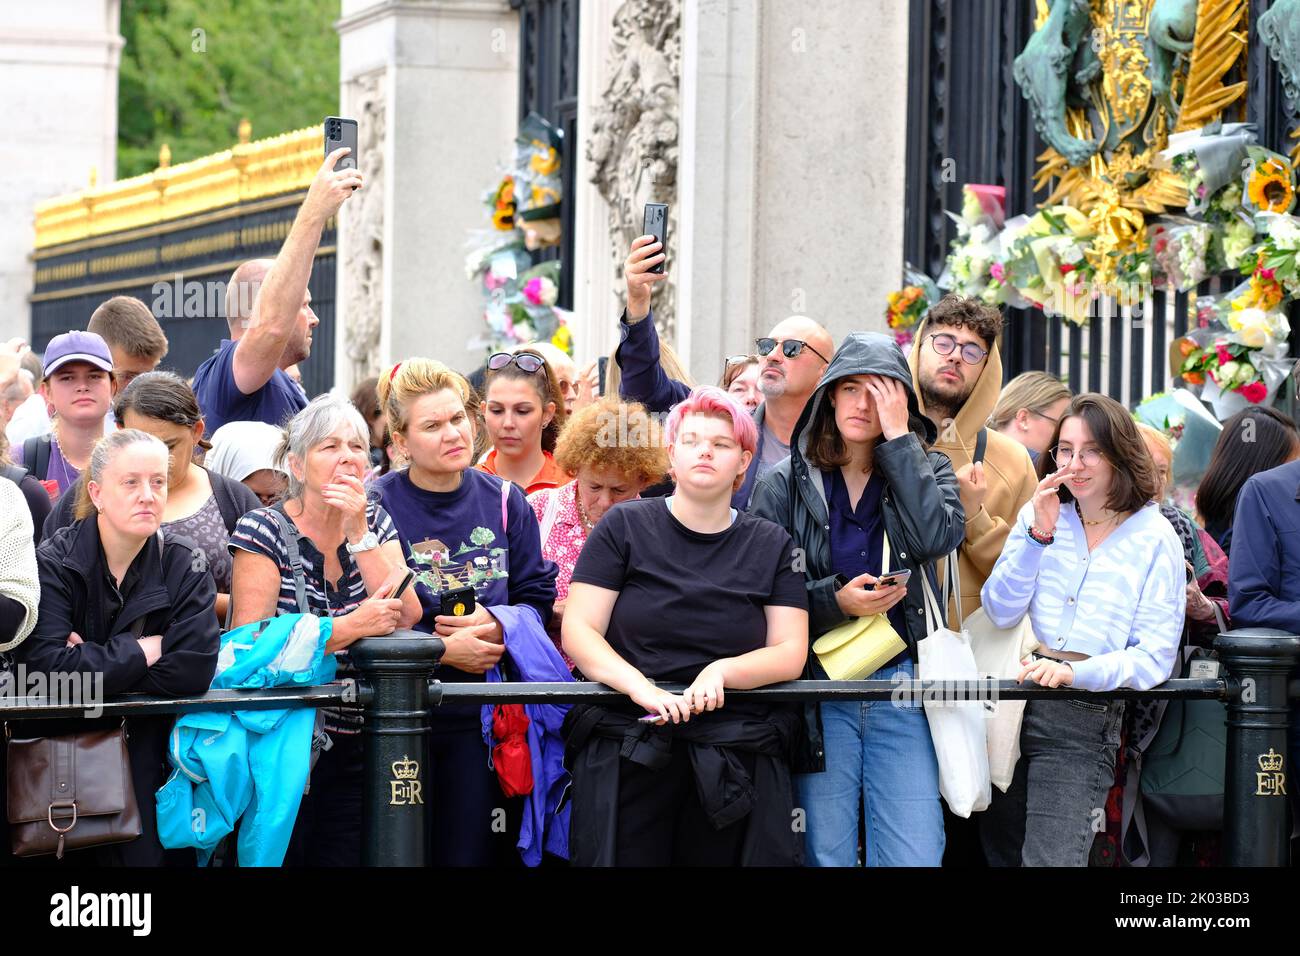 Buckingham Palace, London, UK – Friday 9th September 2022 – Large crowds gather outside Buckingham Palace to mourn the death of Queen Elizabeth II. Photo Steven May / Alamy Live News Stock Photo